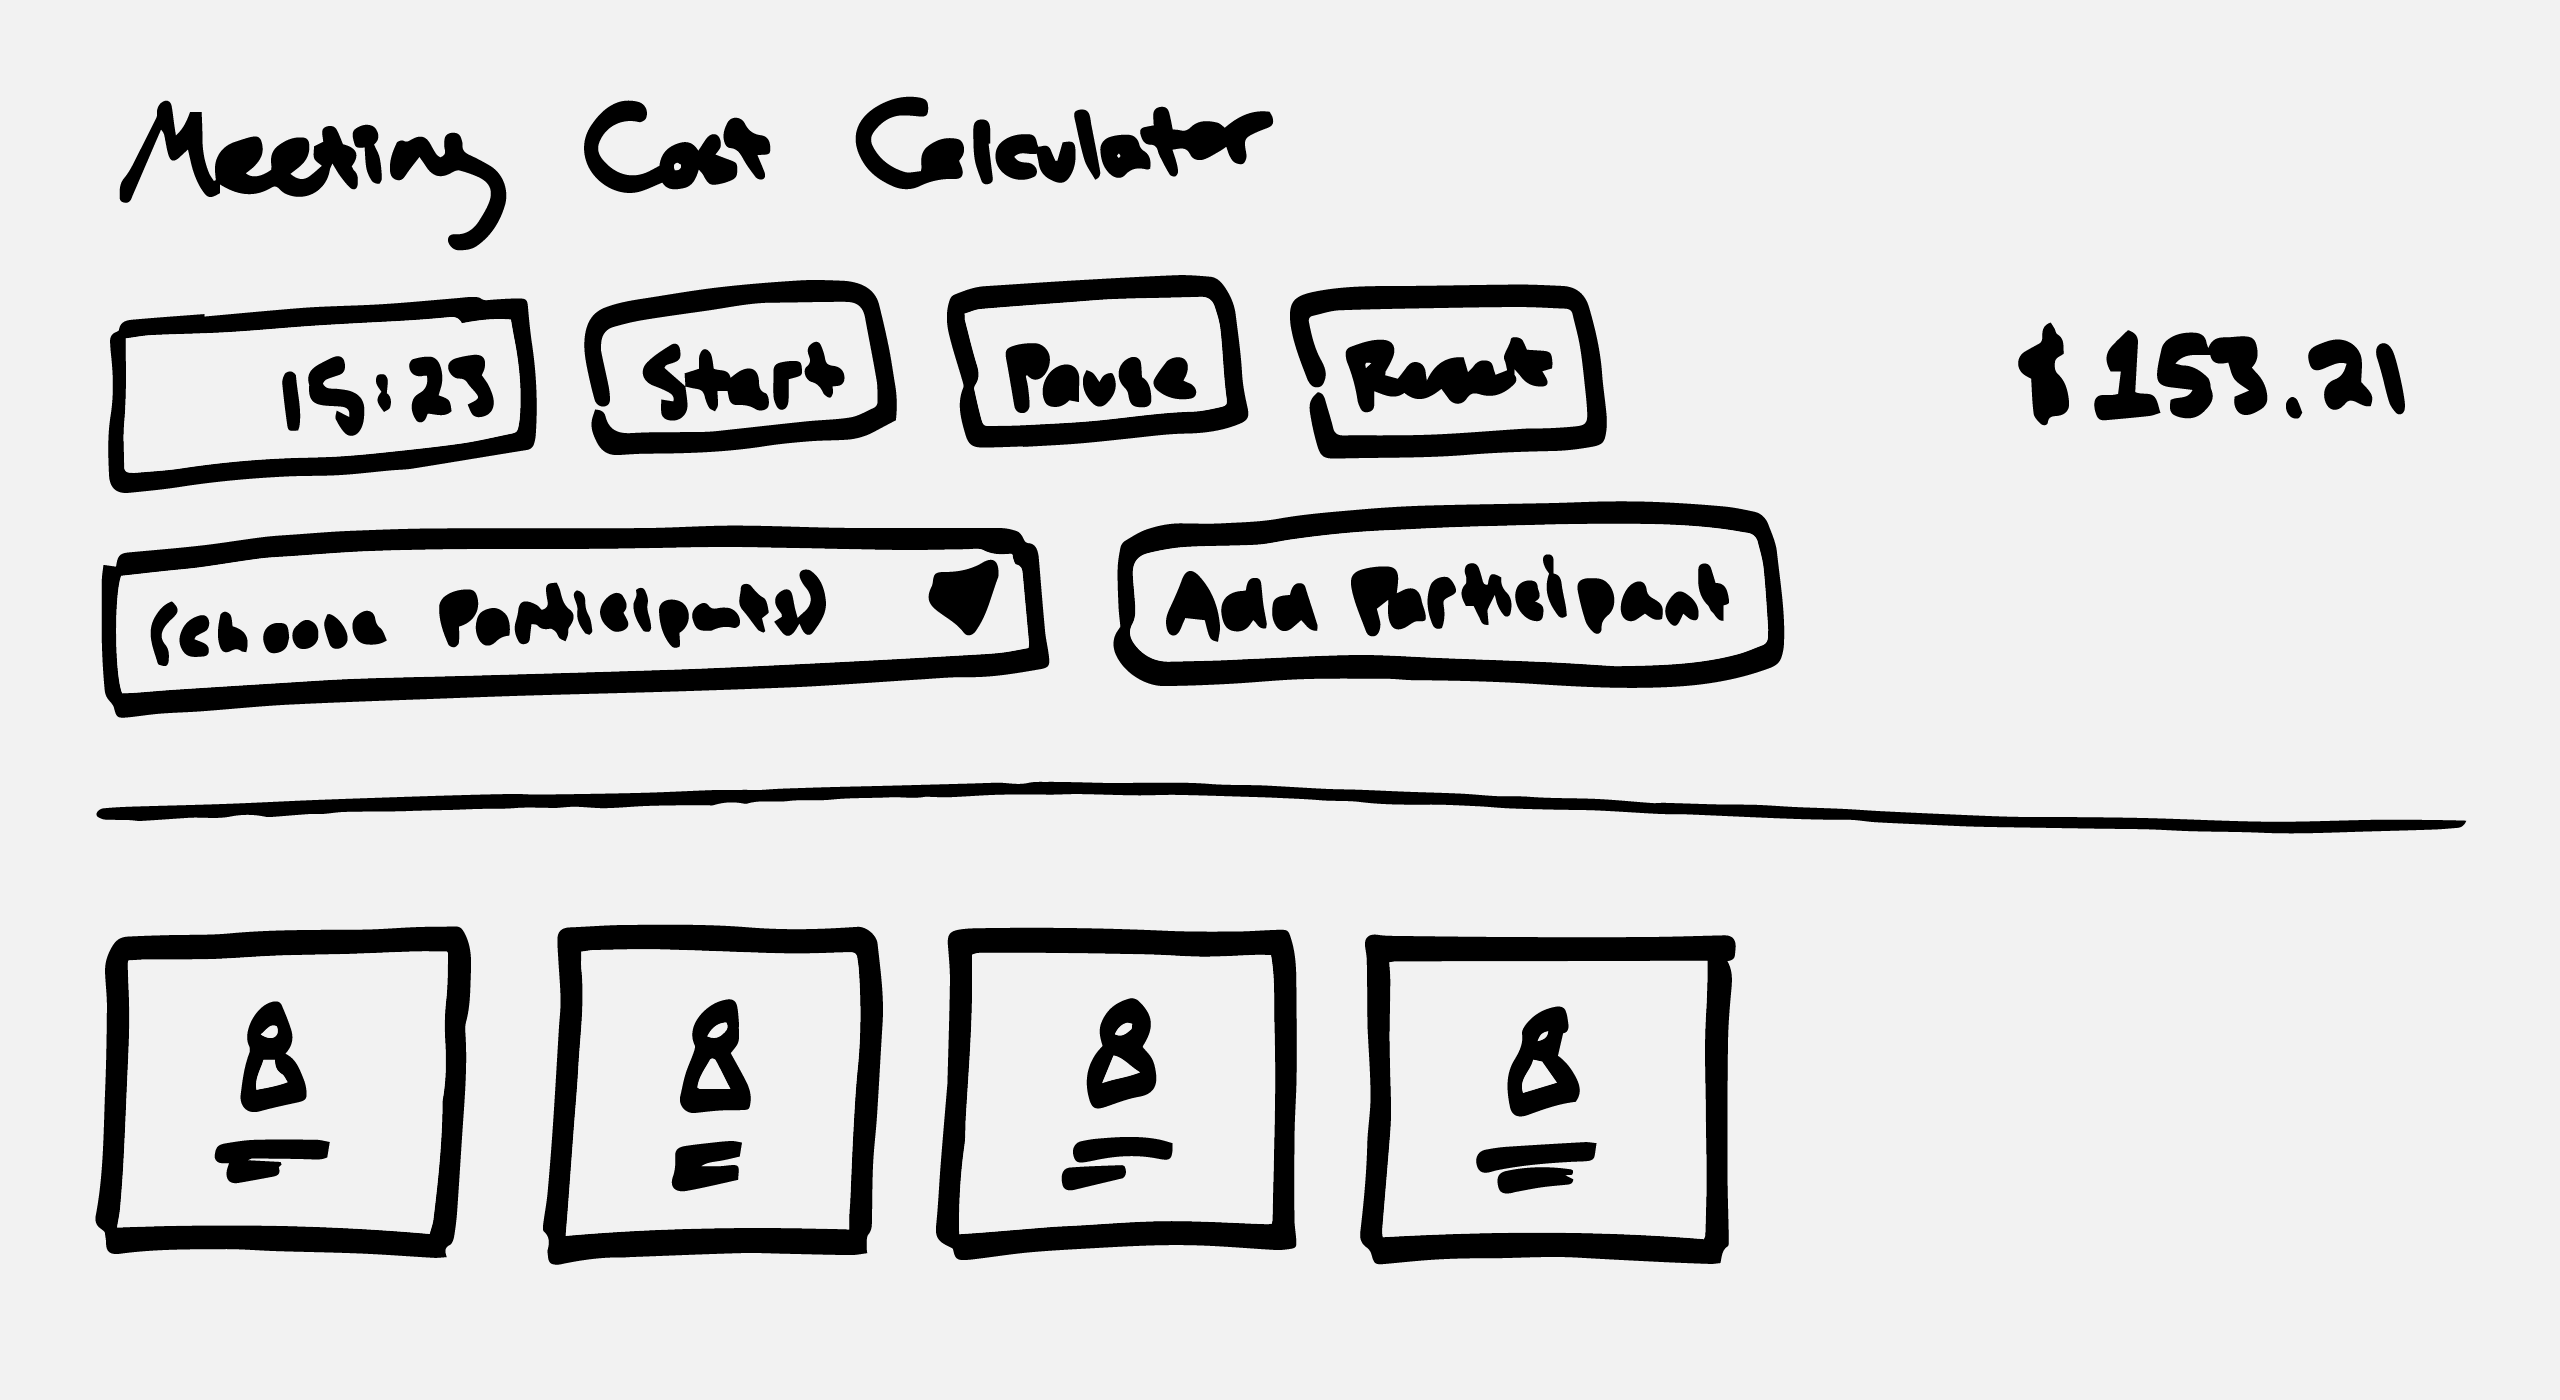 A hand-drawn sketch of the user interface of the Meeting Cost Calculator, with the different buttons and menus illustrated.